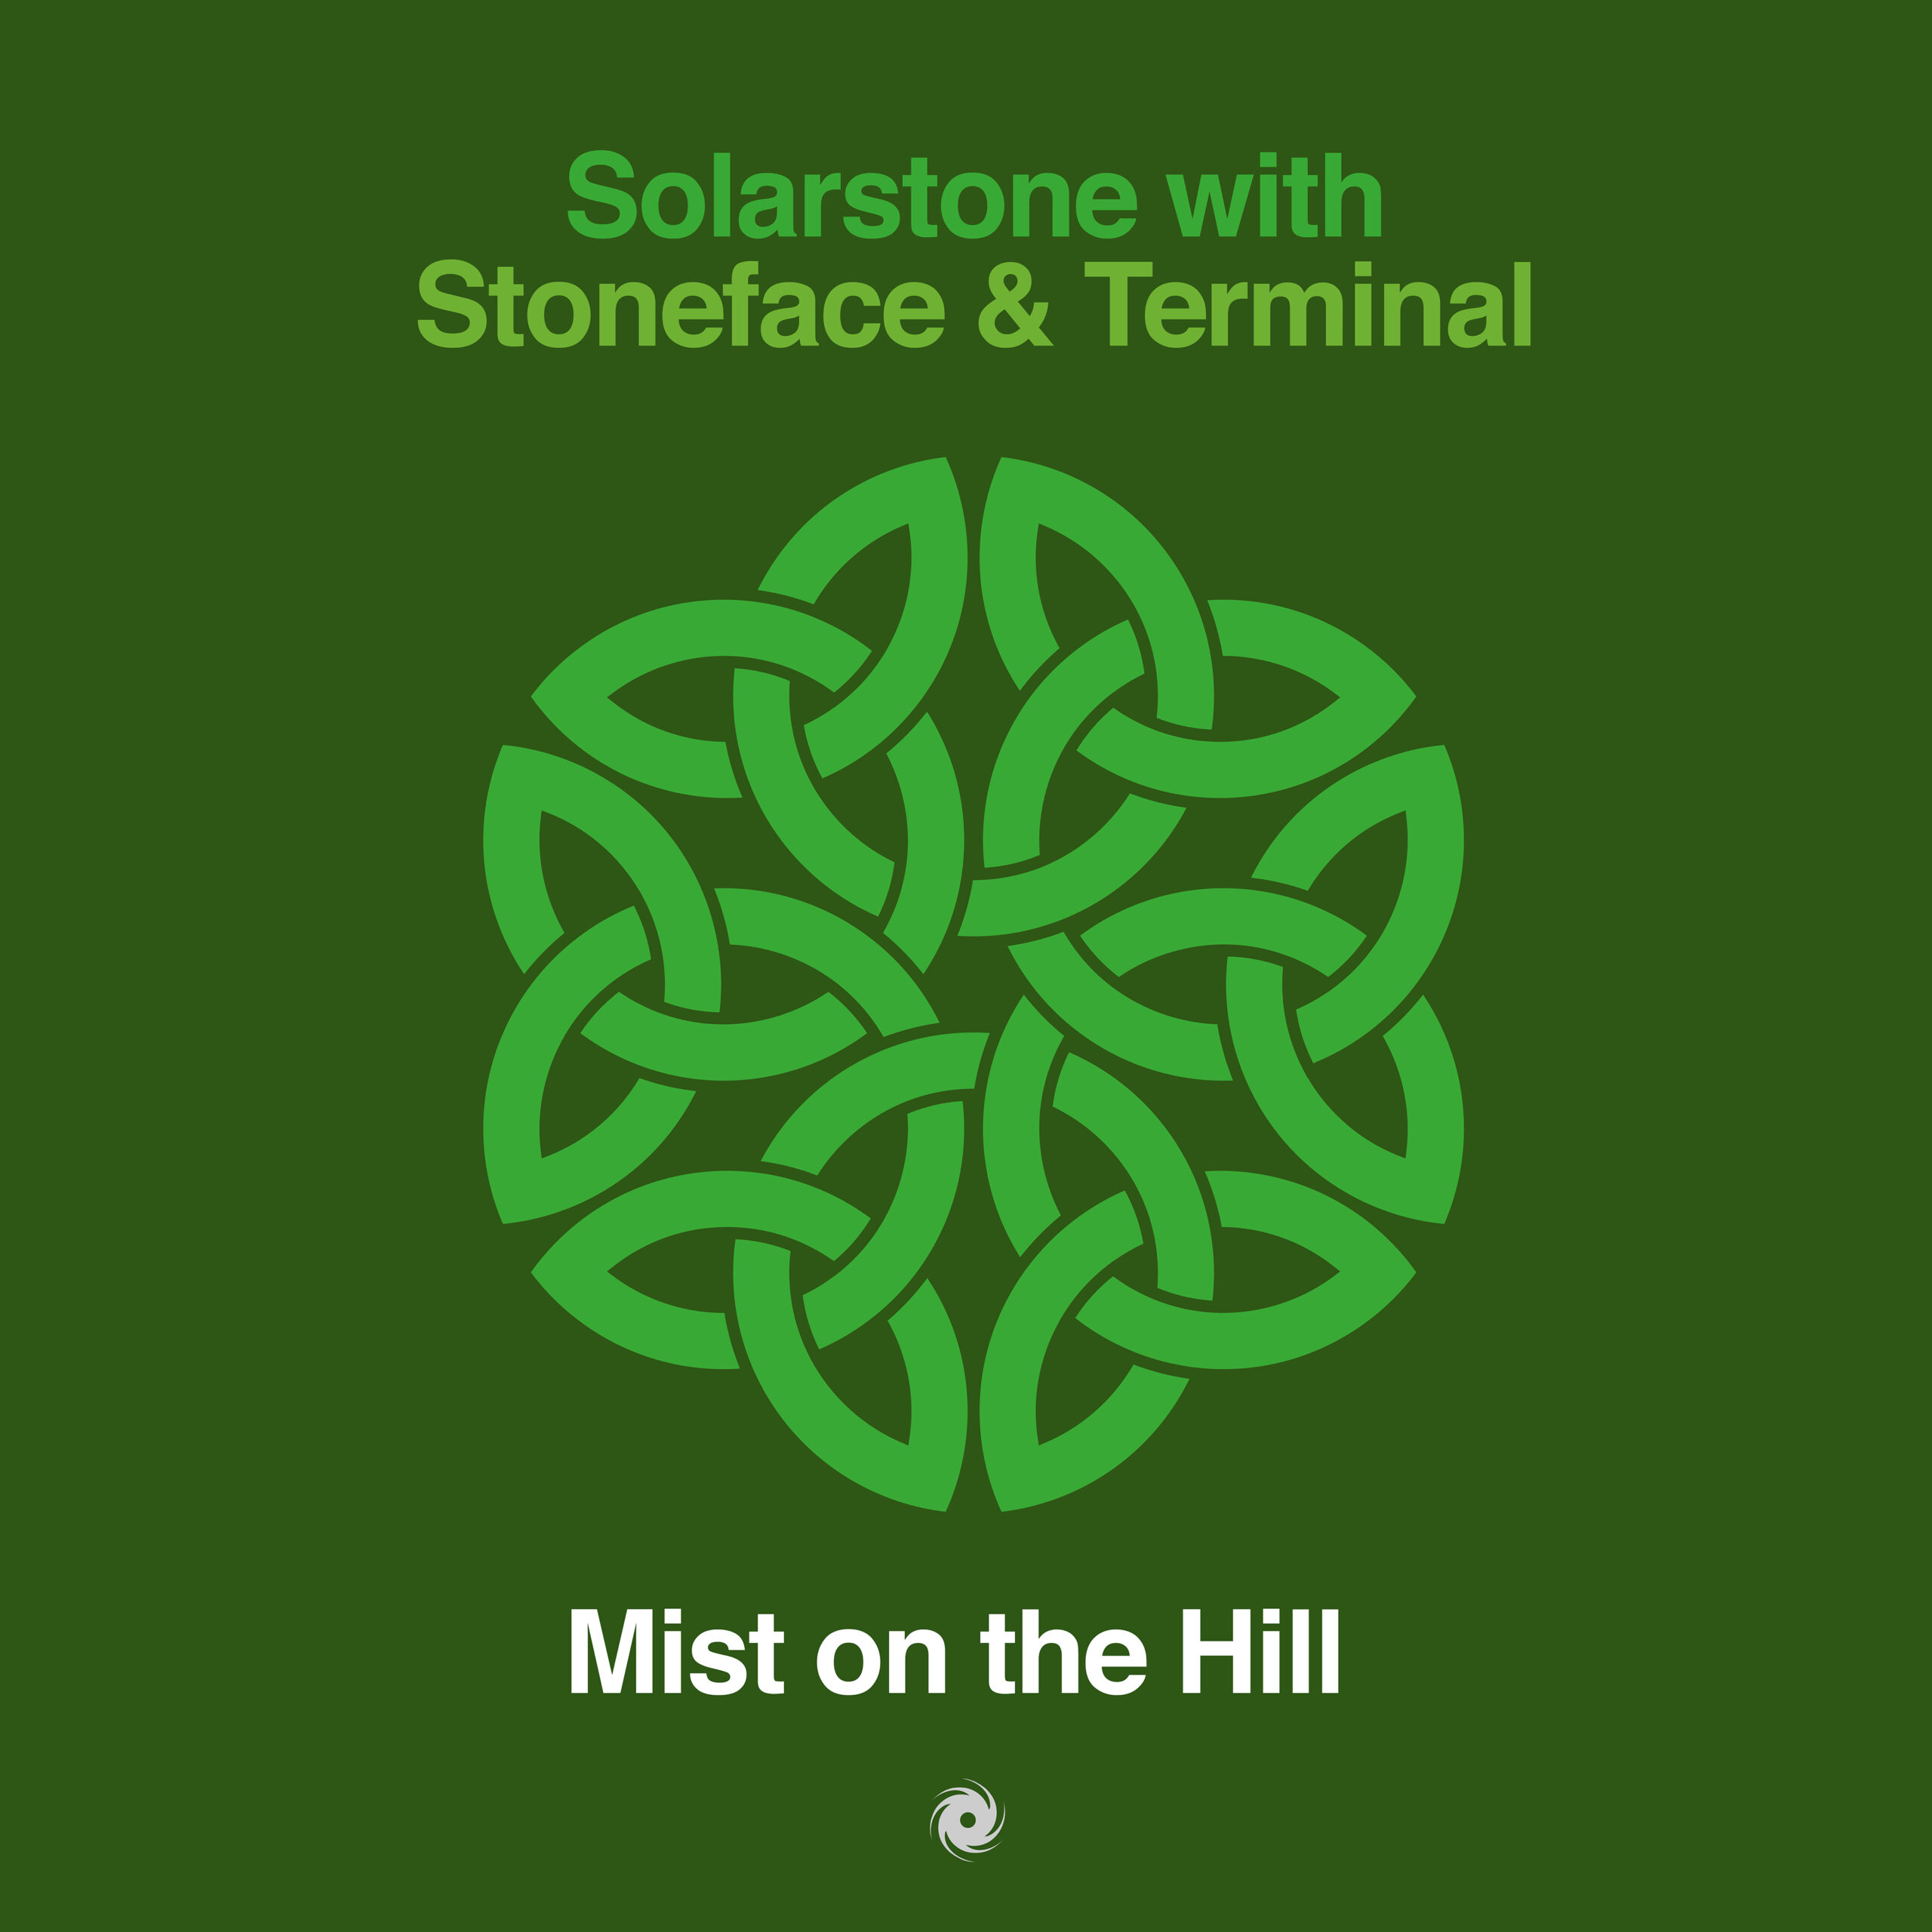 Solarstone with Stoneface and Terminal presents Mist on the Hill on Black Hole Recordings